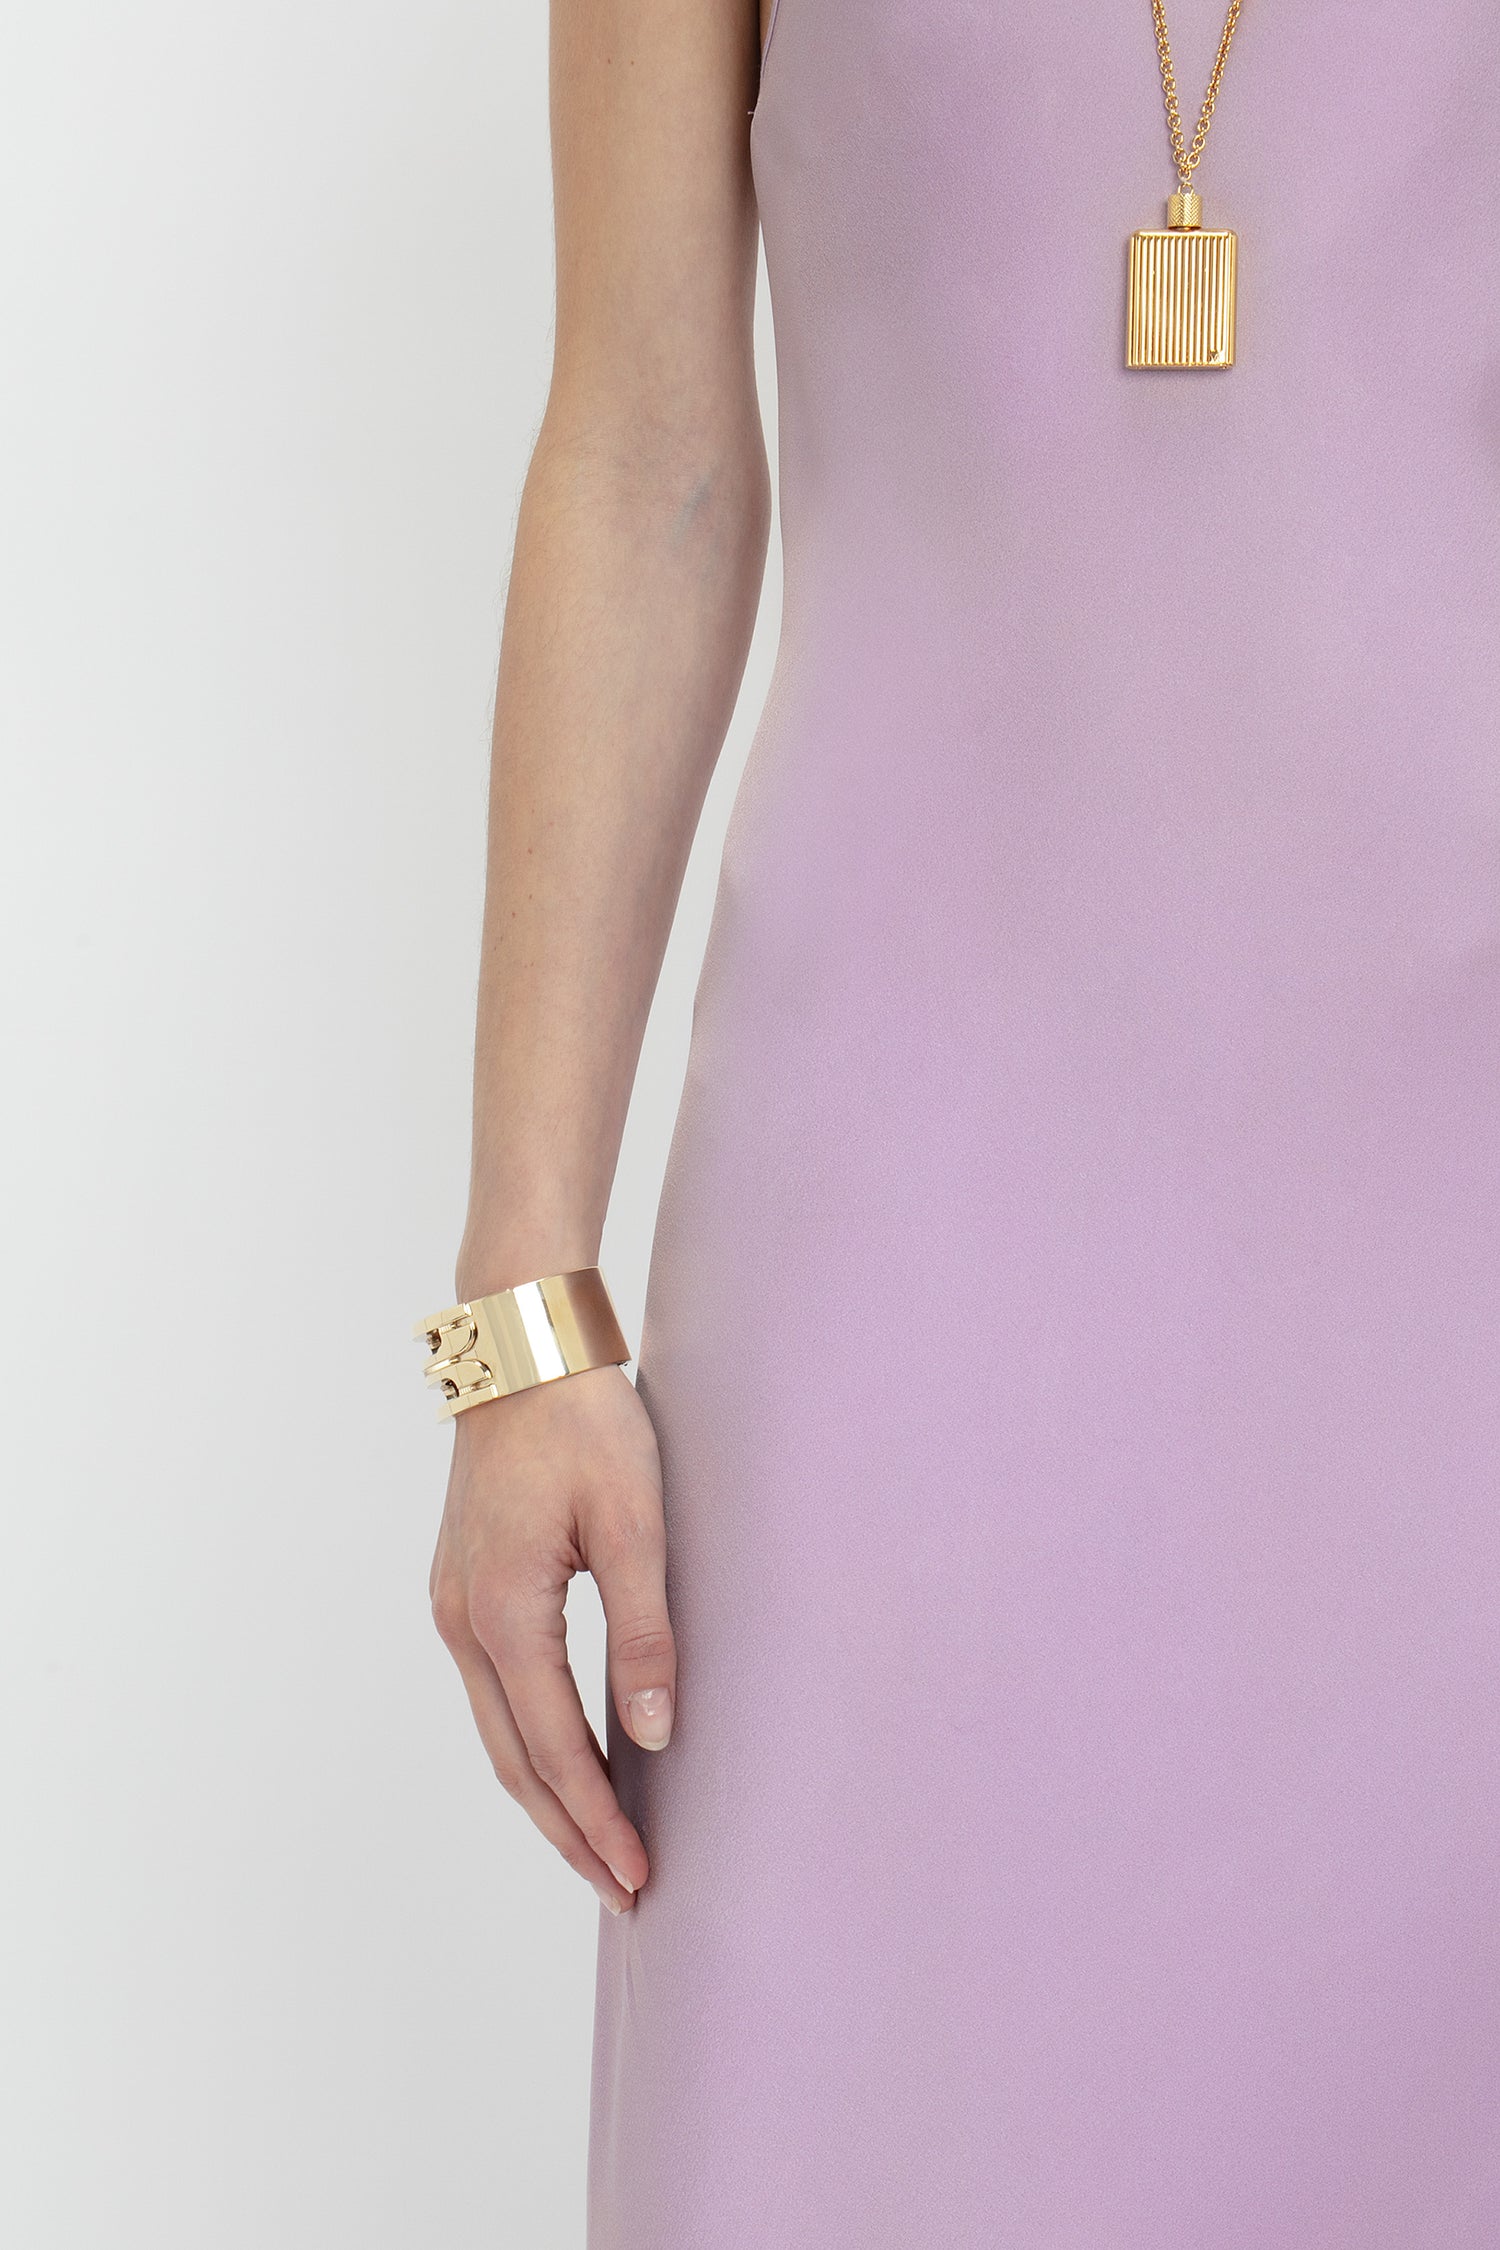 Woman wearing a Victoria Beckham Low Back Cami Floor-Length Dress In Rosa with a deep V neckline, complemented by a gold necklace and bracelet, focusing on jewelry and elegant attire.